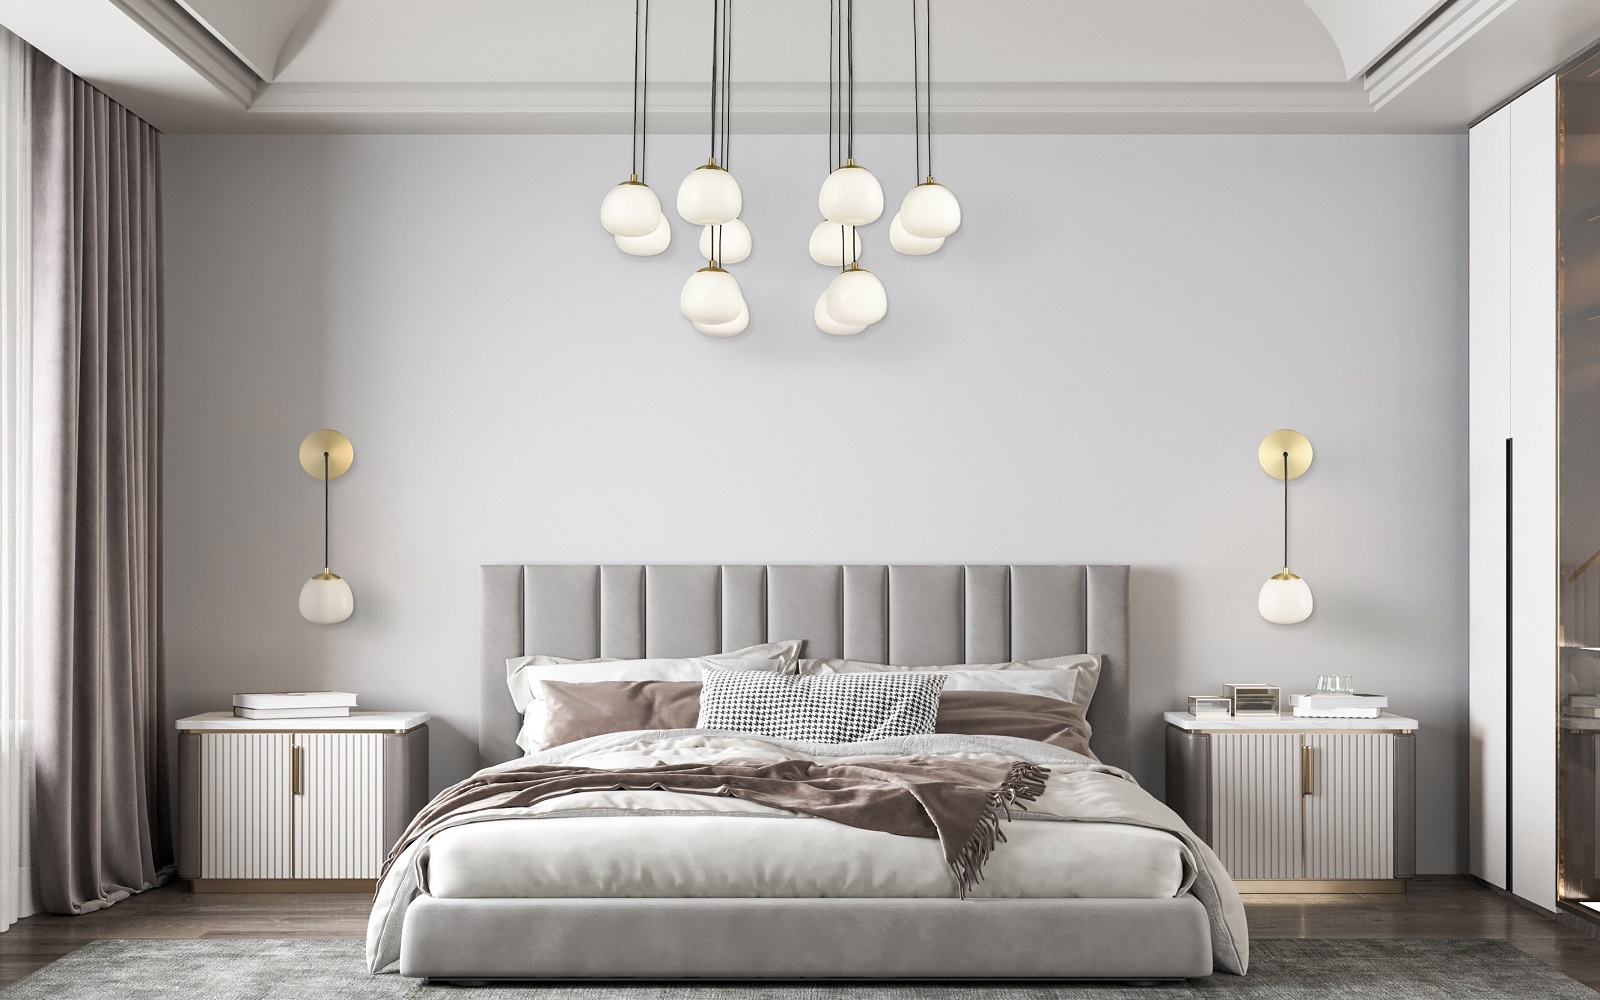 Vermeer ceiling light by Franklite in a grey and white bedroom